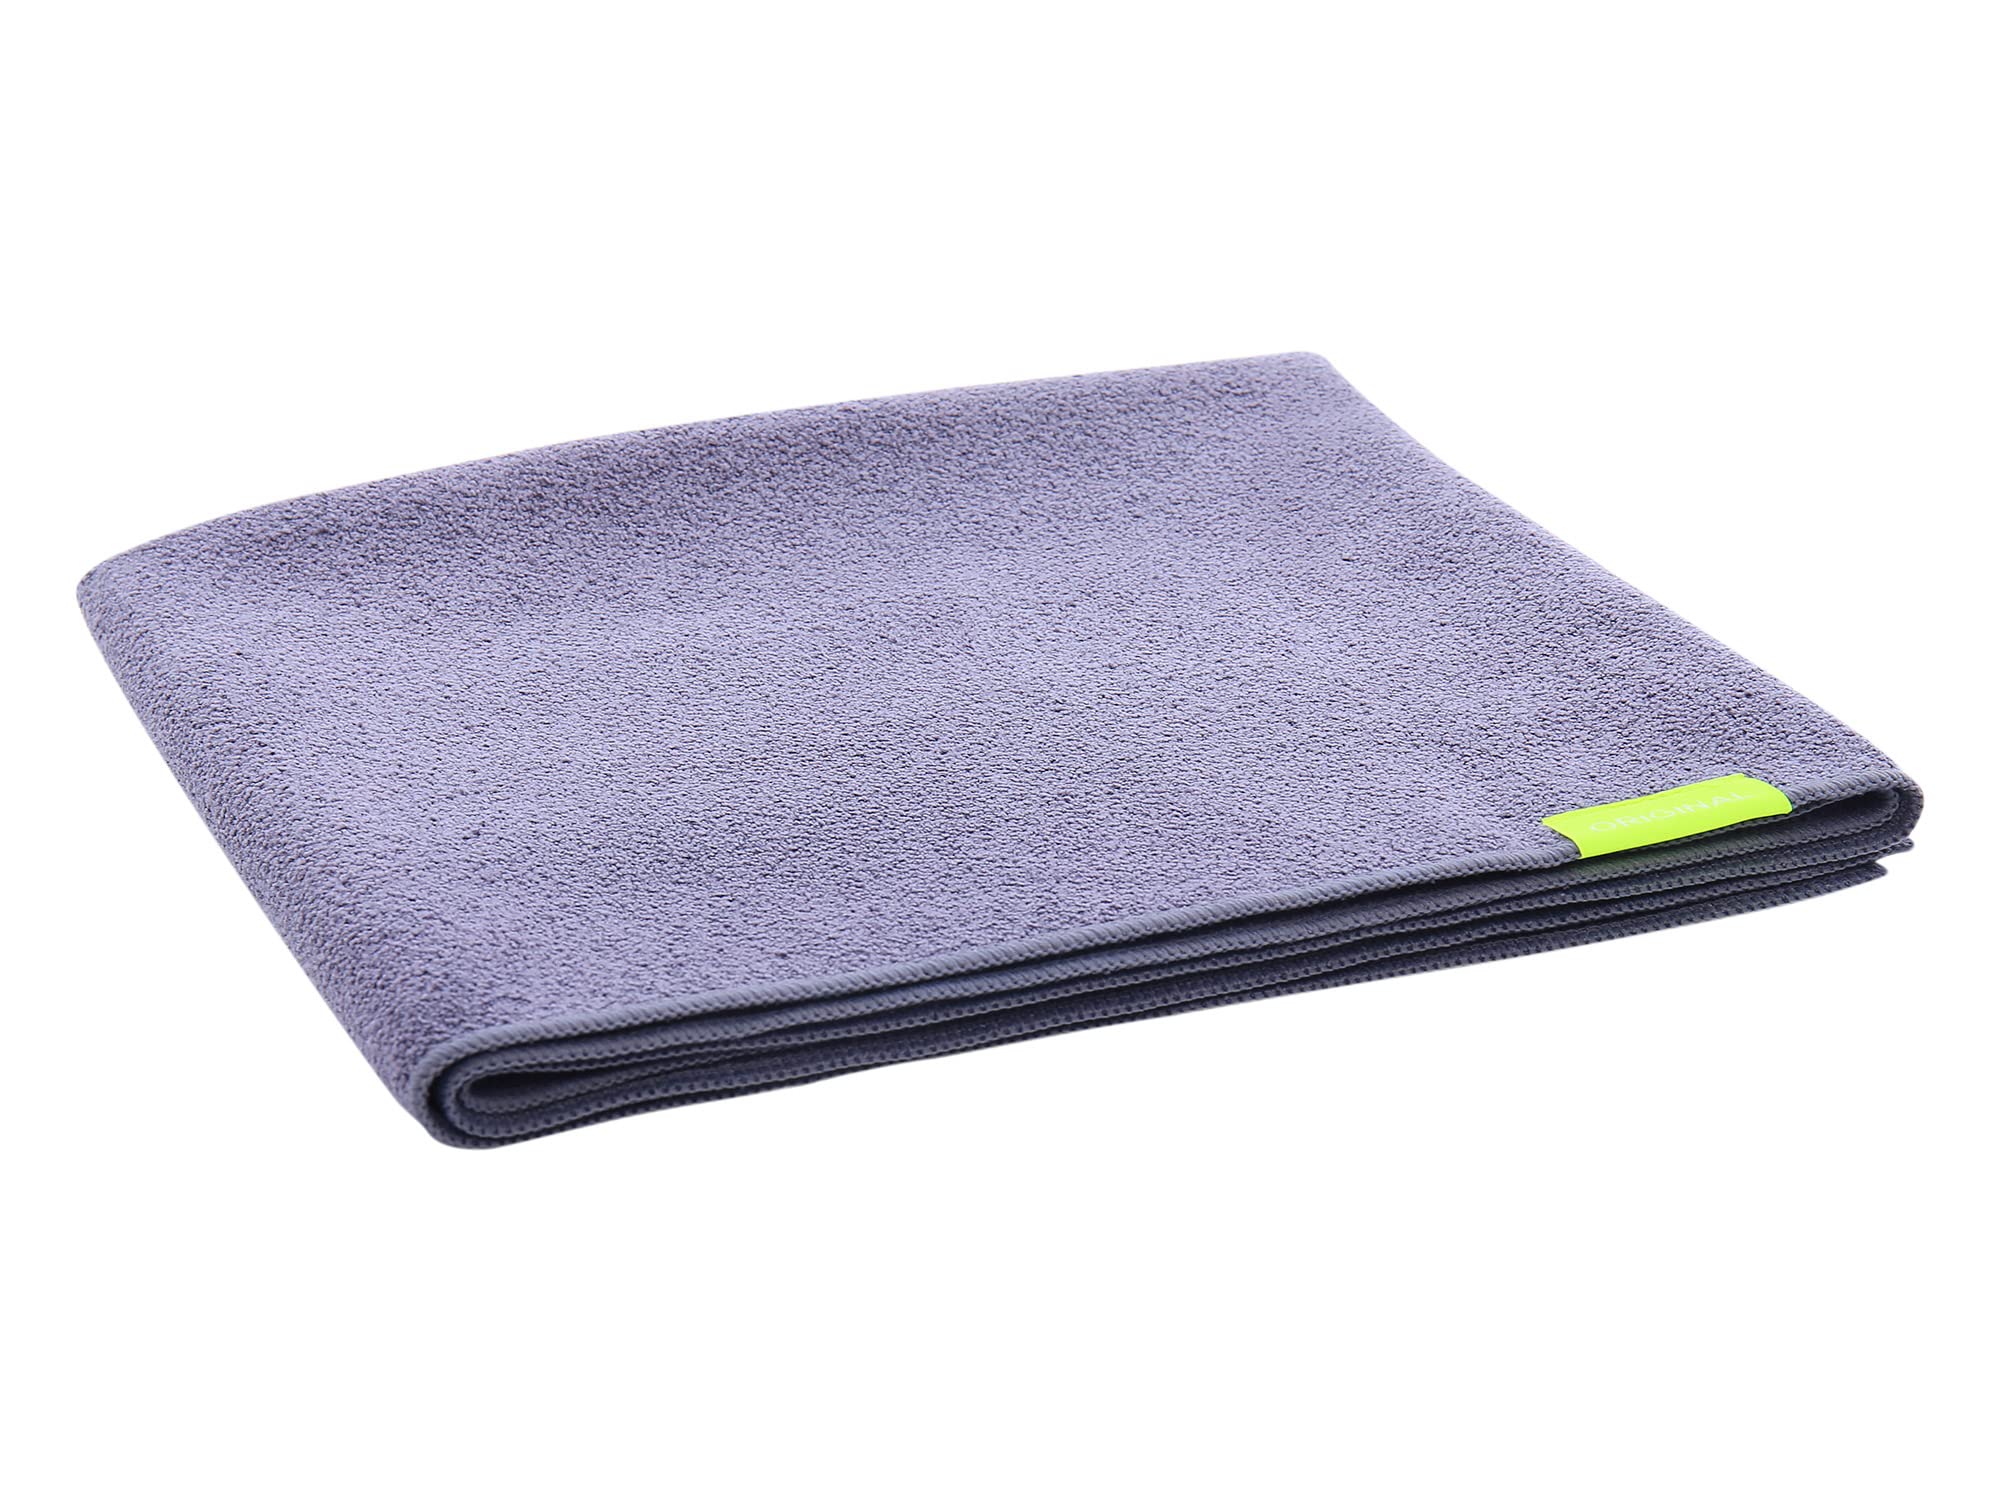 AQUIS Microfiber Hair Towel, Water-Wicking, Ultra Absorbent & 50% Faster Drying, for All Hair Types, Dark Grey